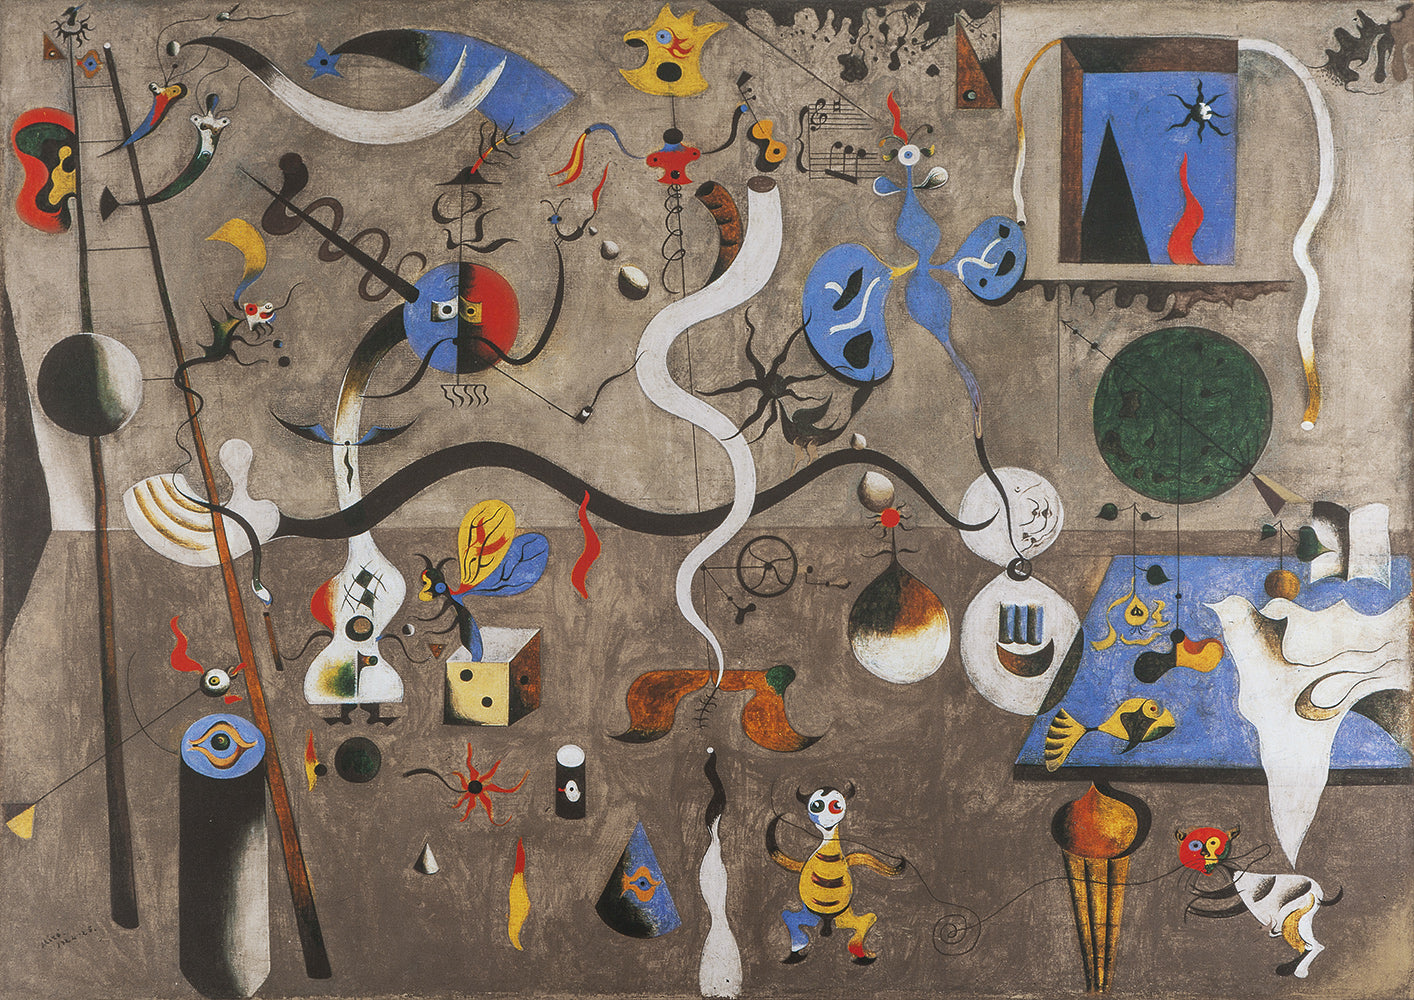 Bluebird Puzzle - Joan Miro  - The Harlequin's Carnival, 1924-1925 - 1000 Piece Jigsaw Puzzle